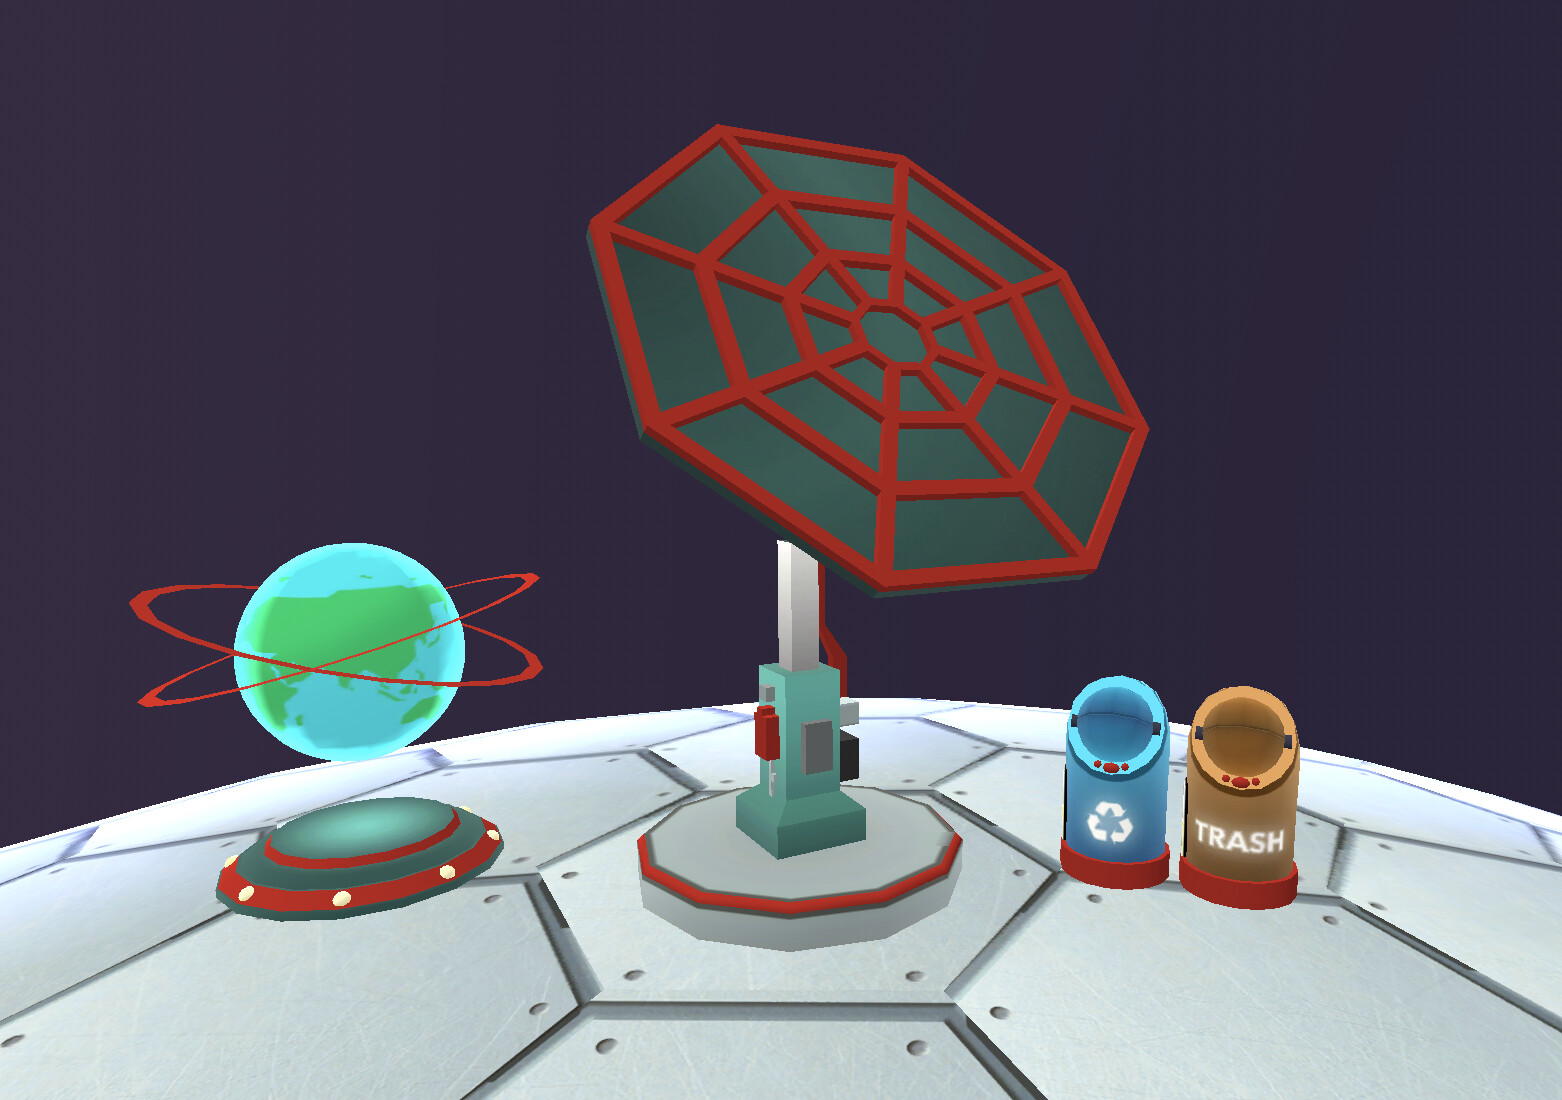 Props for MathTango Starbase from right to left: Earth Hologram, Solar Panel, and Recycling Bins
Starbase has a special feature of allowing the player to choose accent colors for props, so each area that is red on a prop can be customized by the player.
